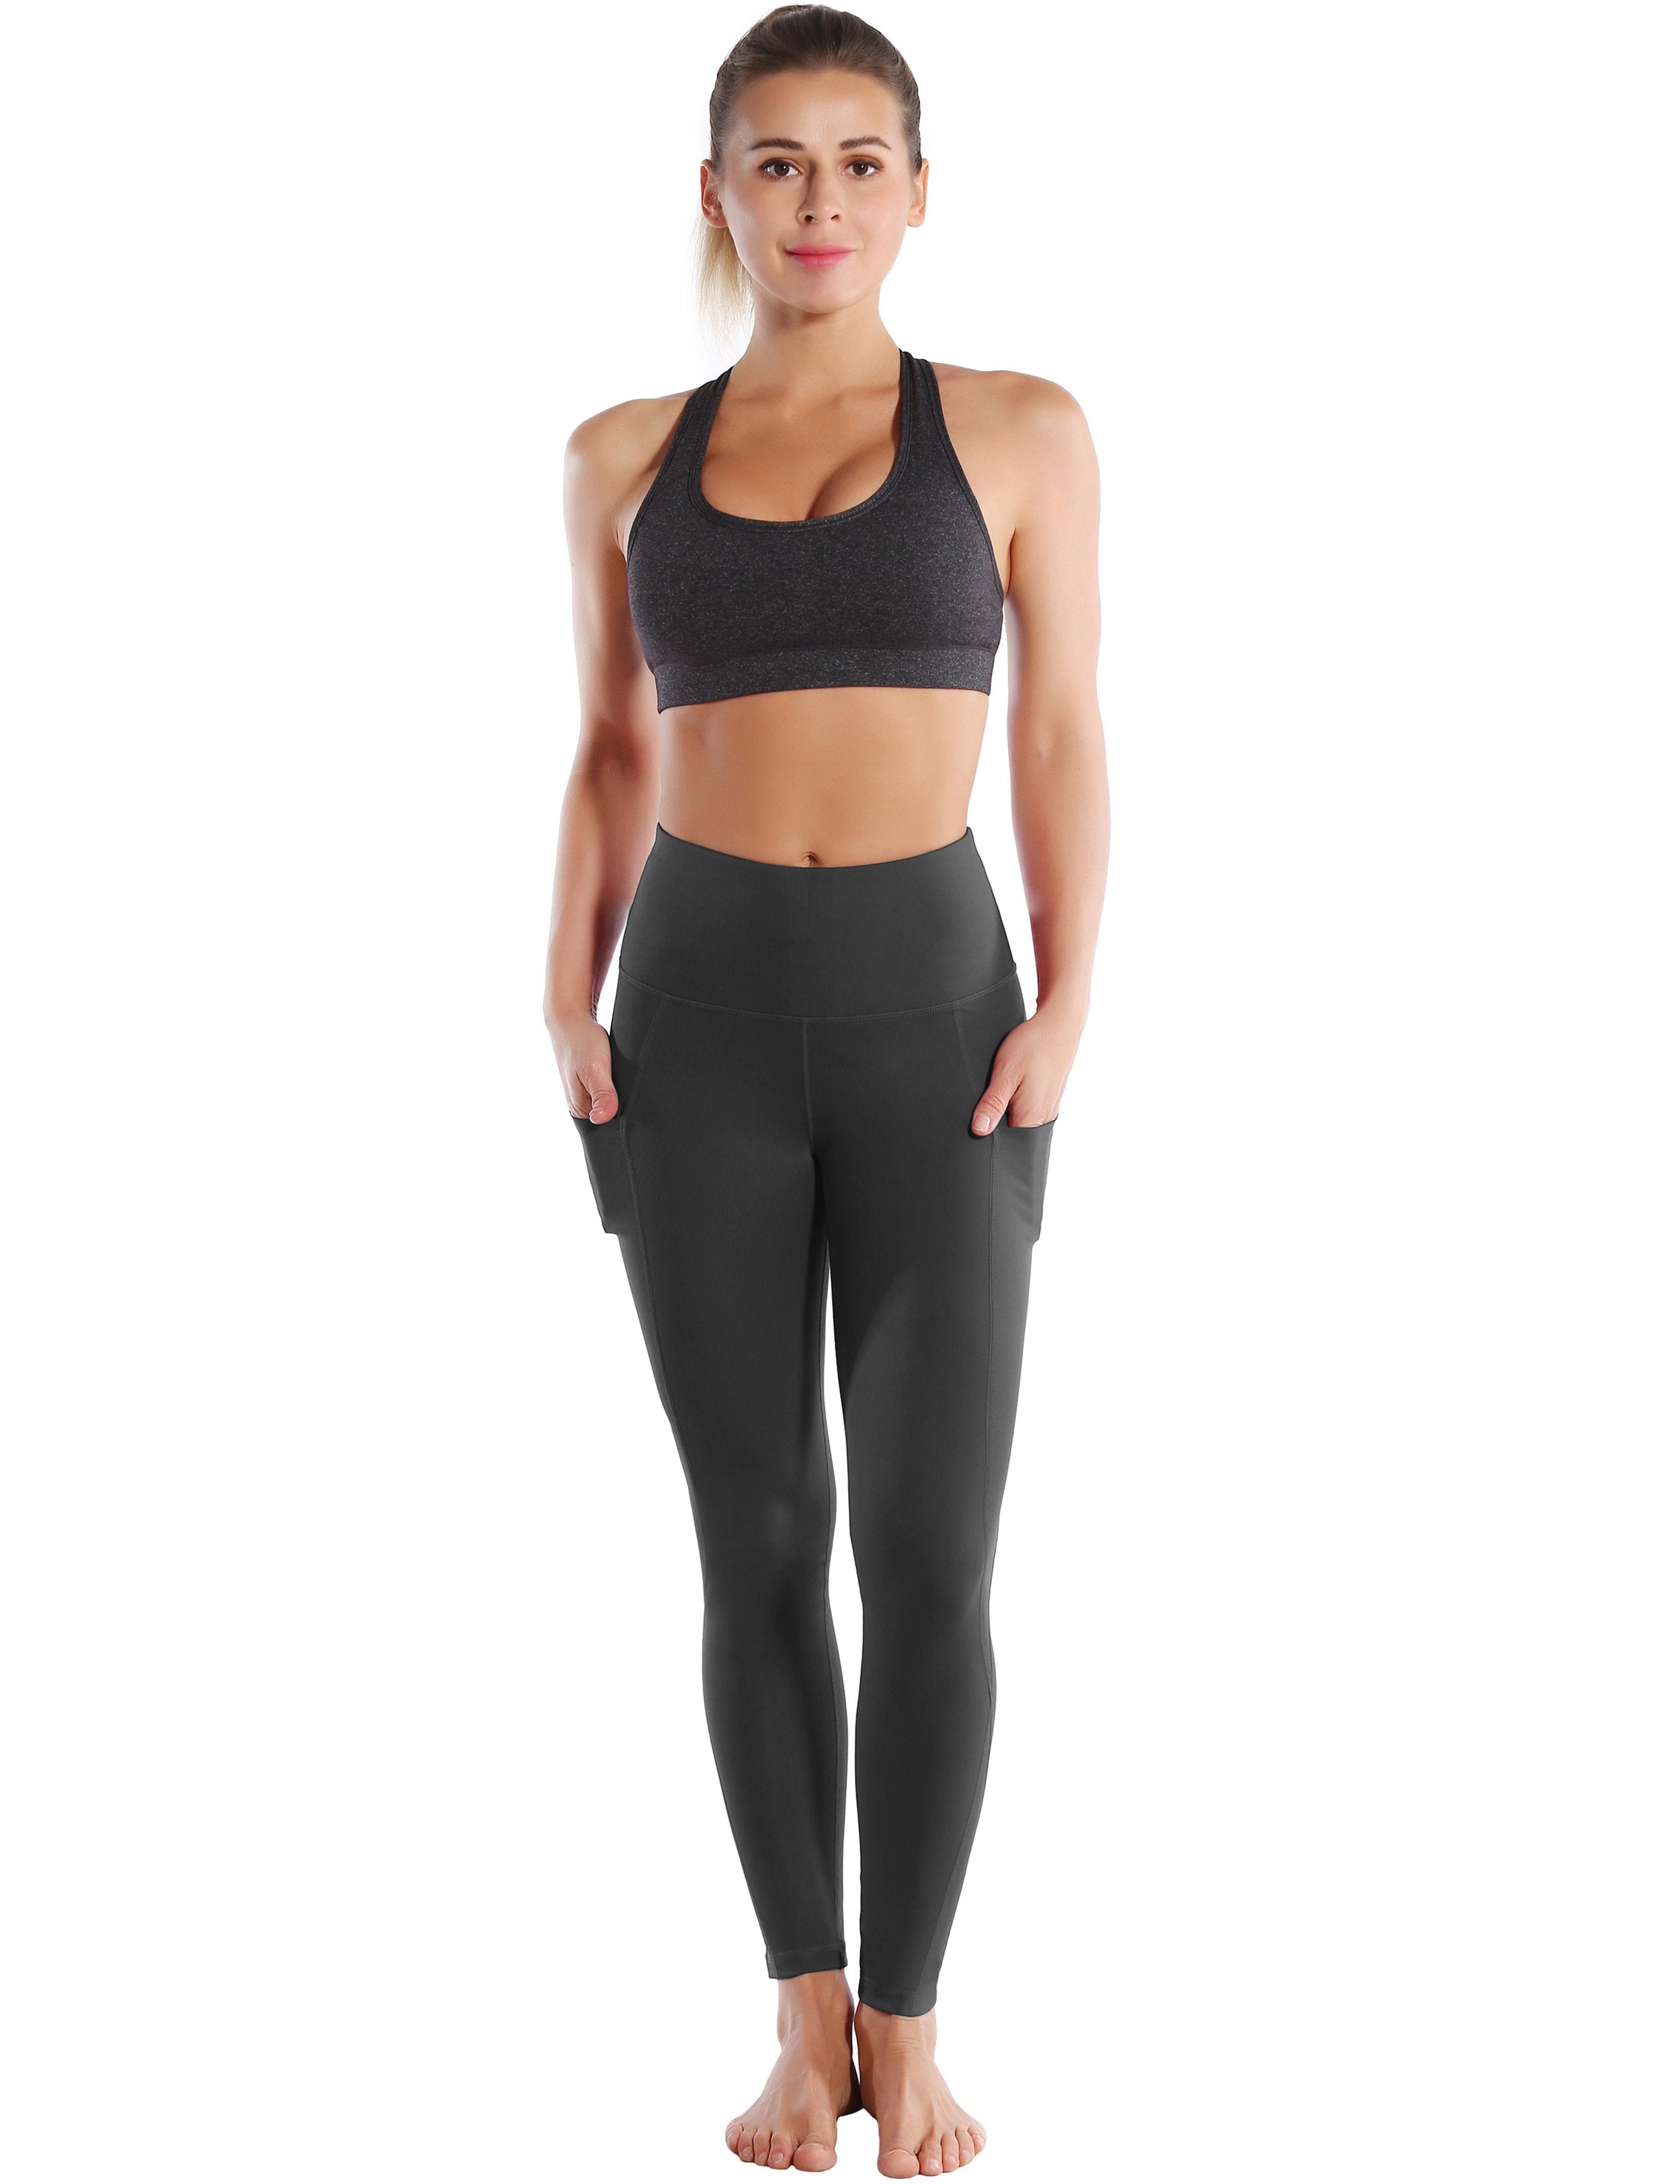 High Waist Side Pockets Yoga Pants shadowcharcoal 75% Nylon, 25% Spandex Fabric doesn't attract lint easily 4-way stretch No see-through Moisture-wicking Tummy control Inner pocket